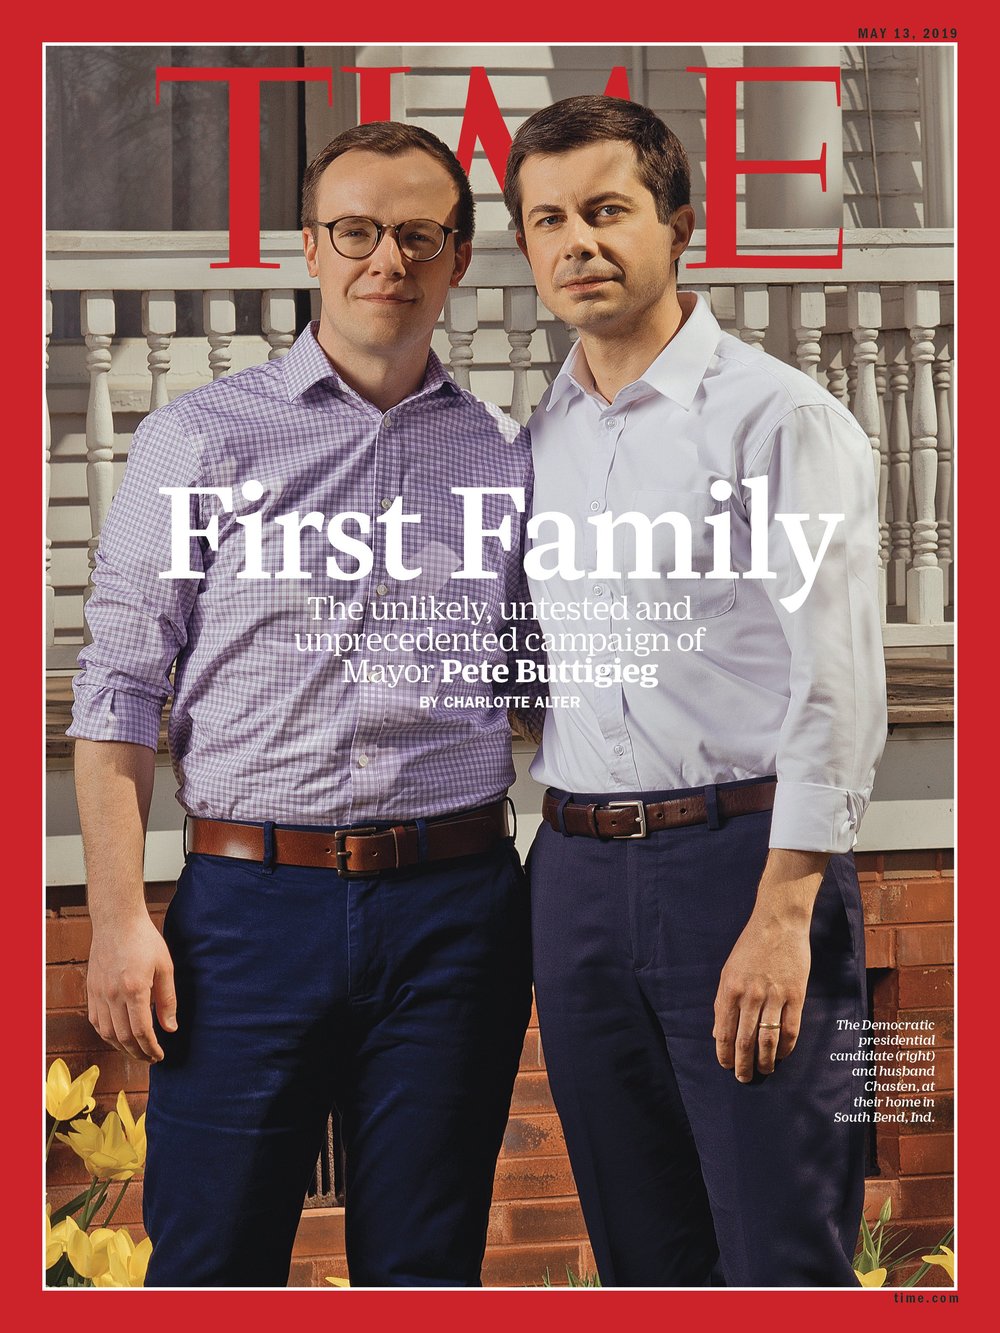  Time magazine - May 2019 